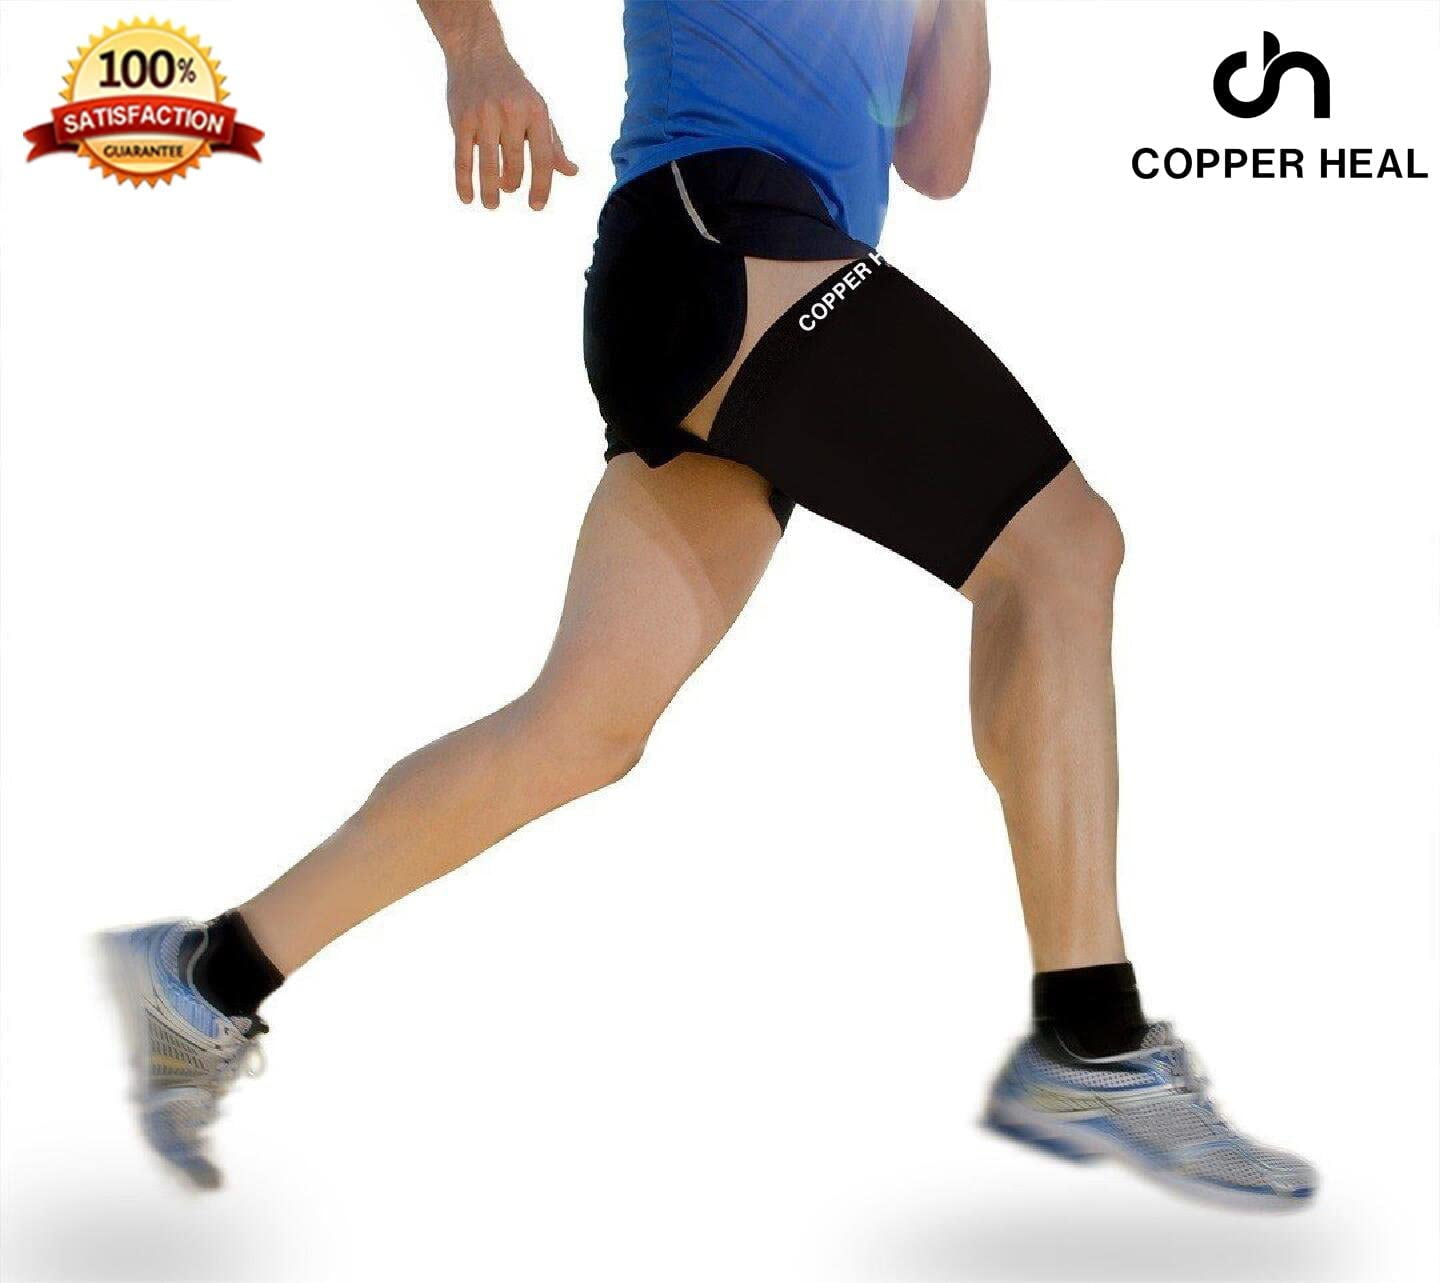 Thigh Compression Recovery Sleeve by COPPER HEAL Black Unisex Running